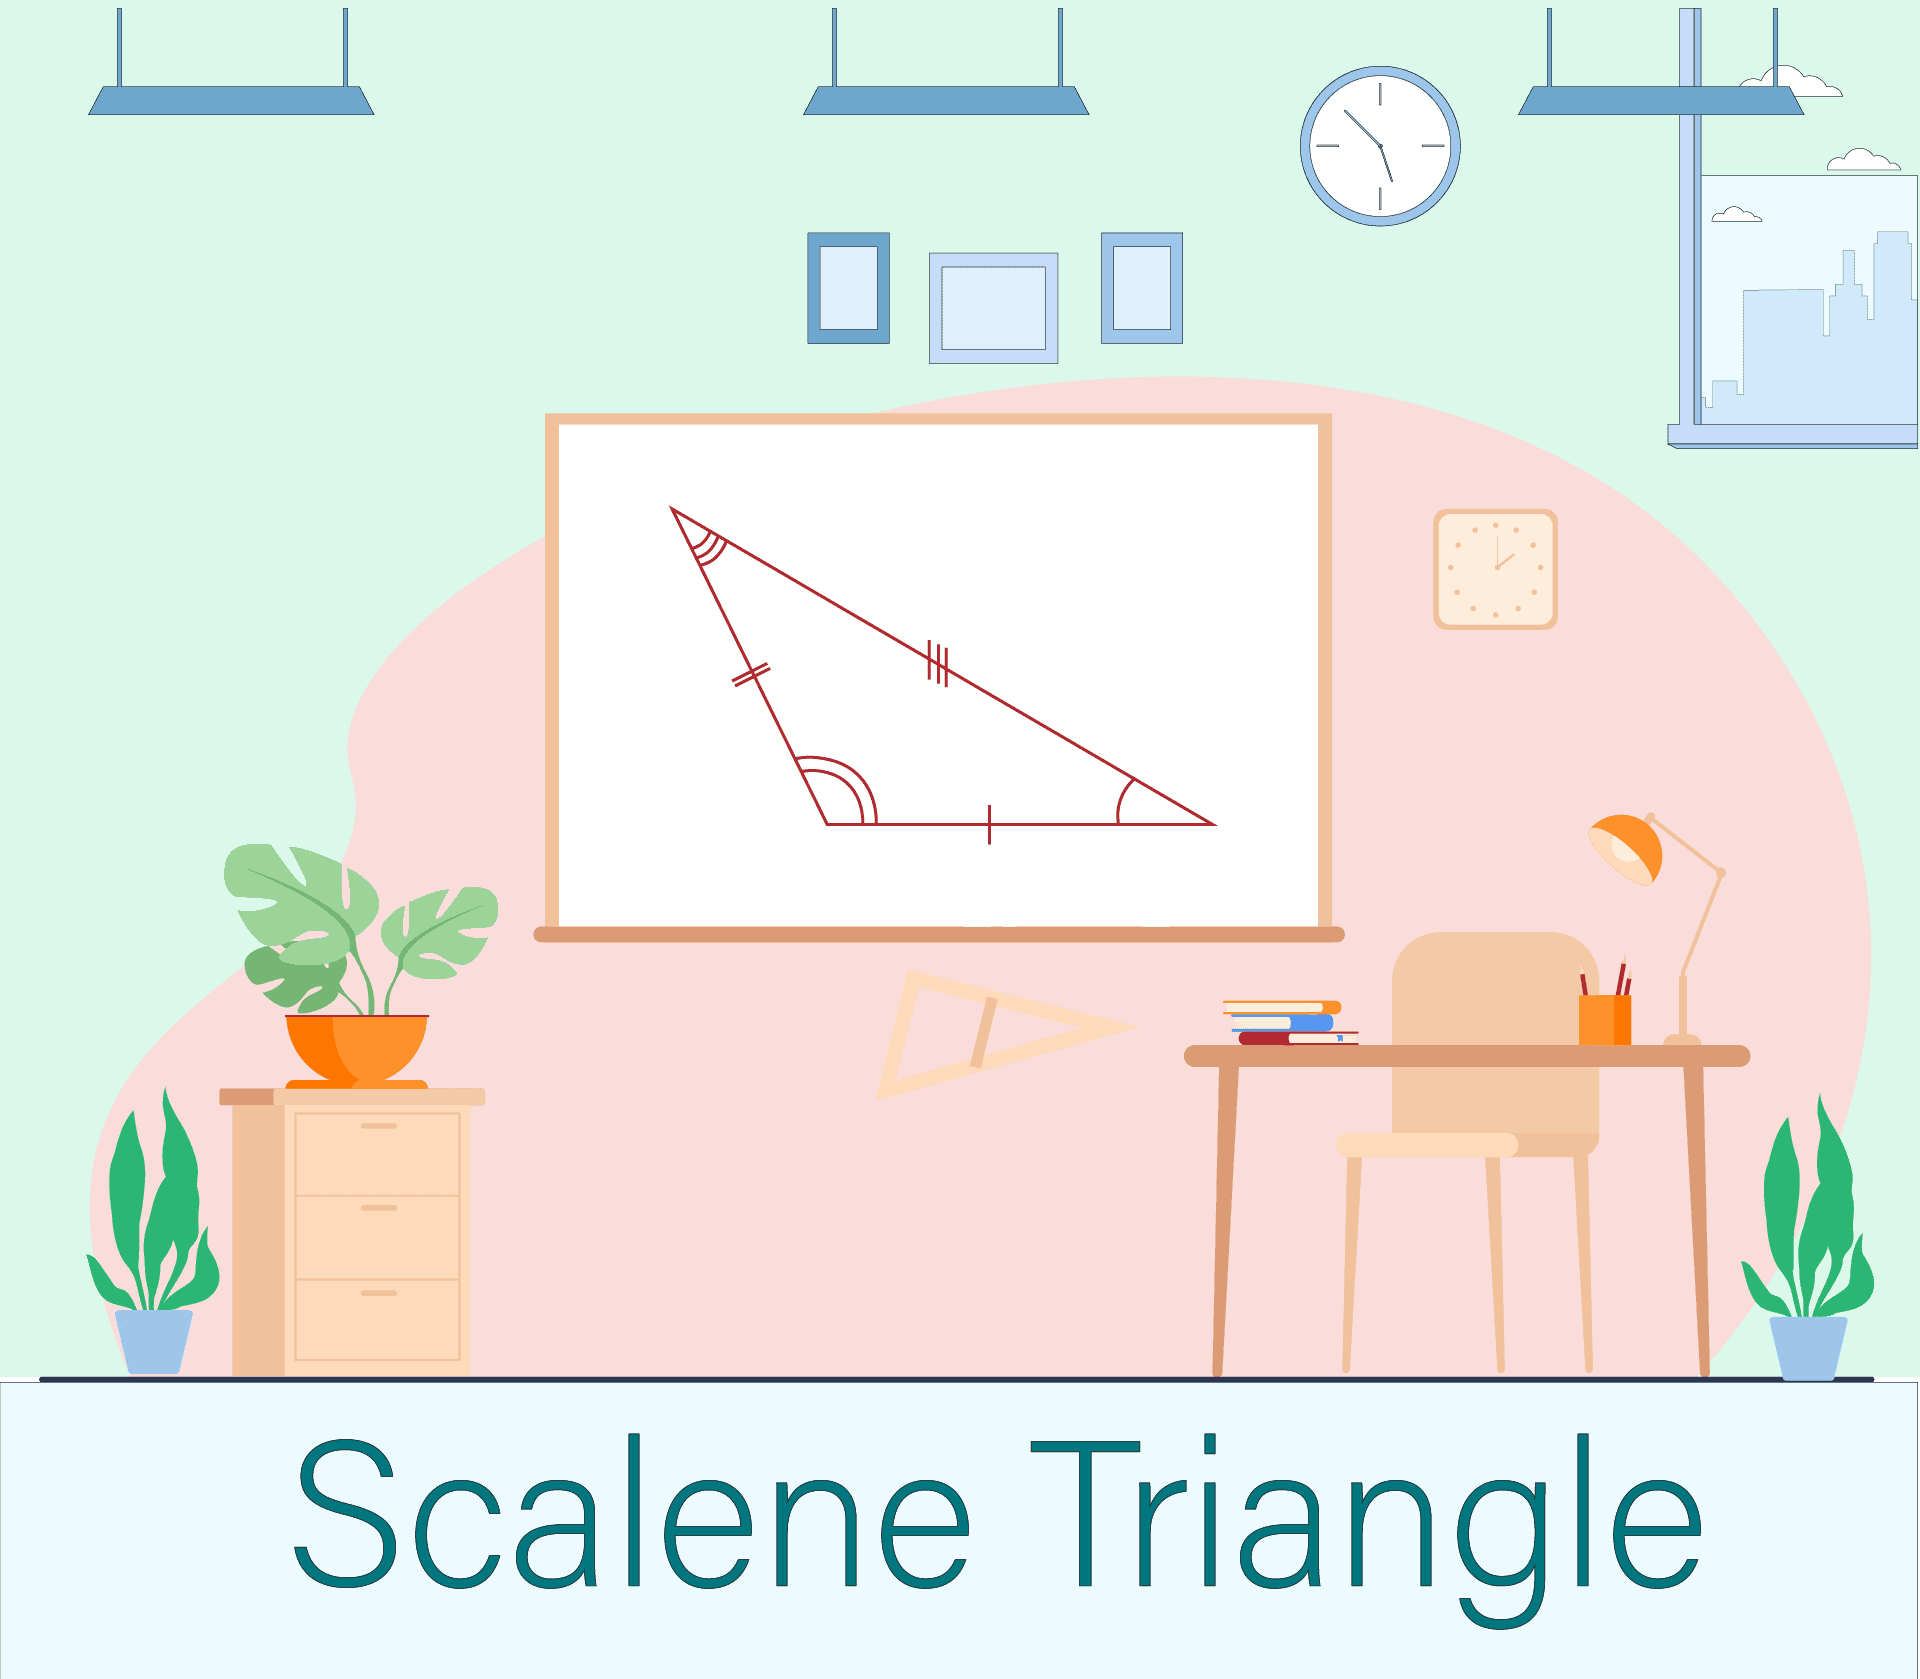 a scalene triangle with three unven sides